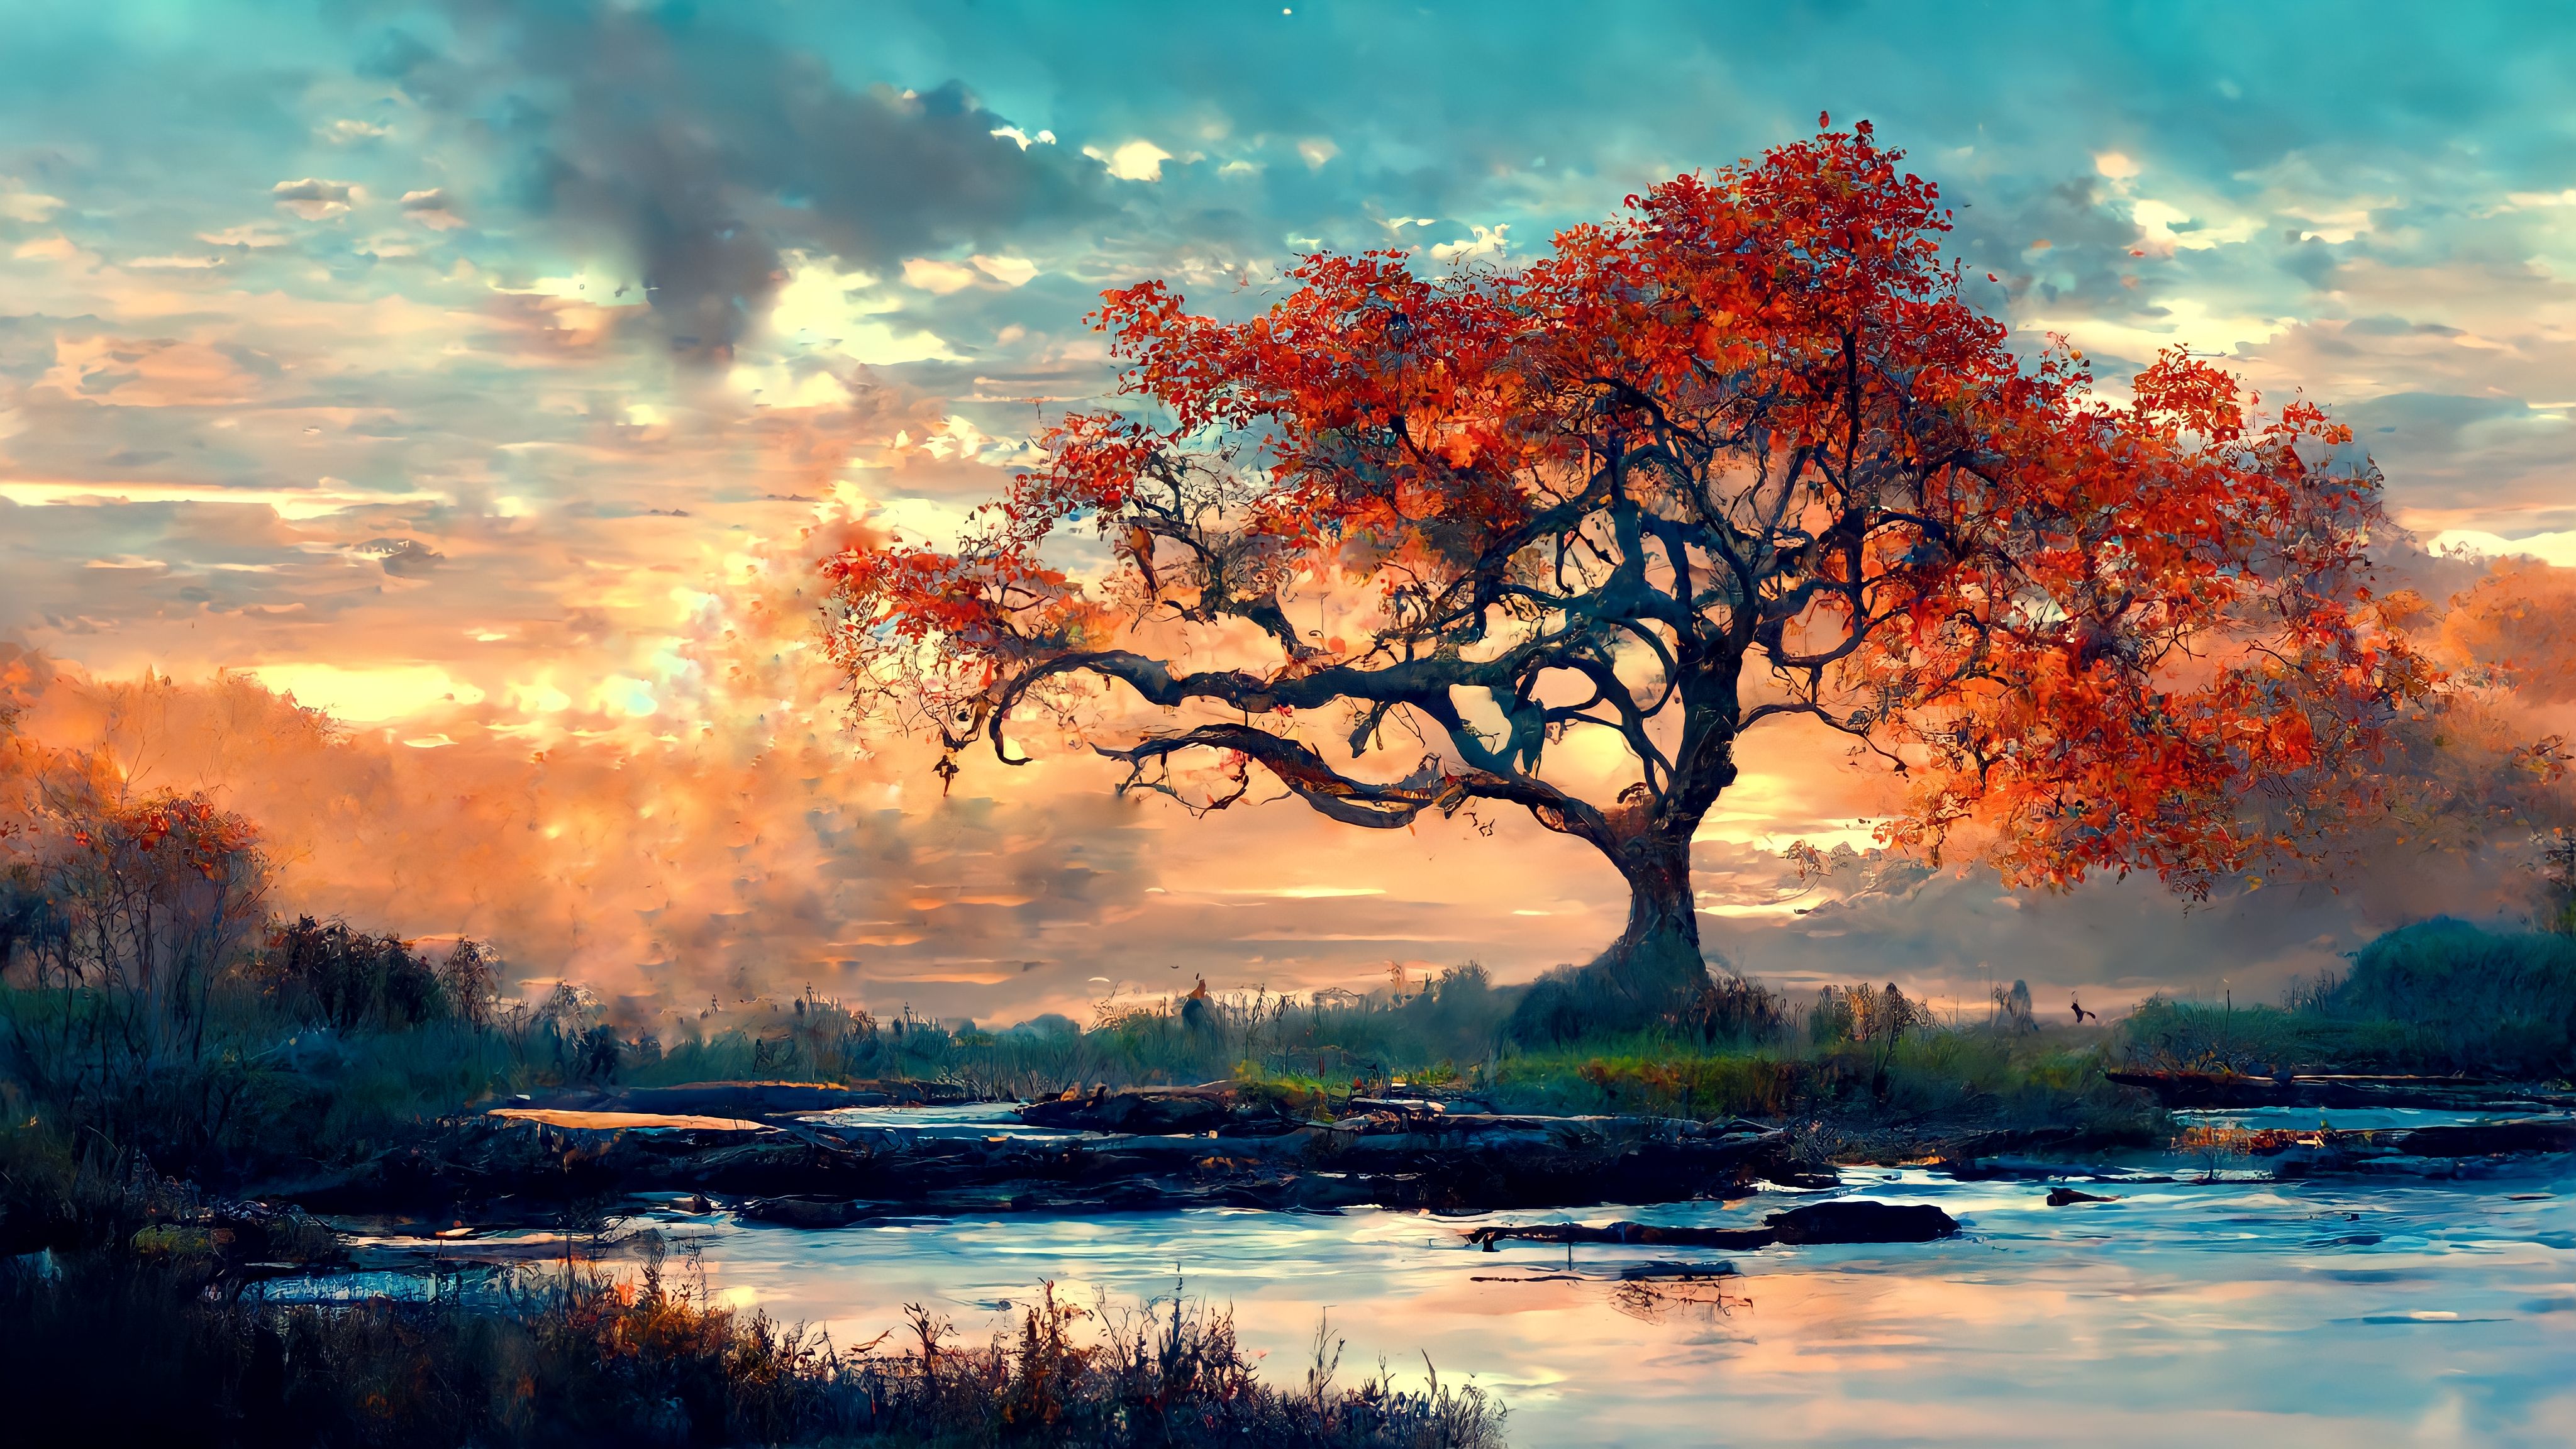 General 4096x2304 red trees landscape lake sunset branch clouds AI art nature